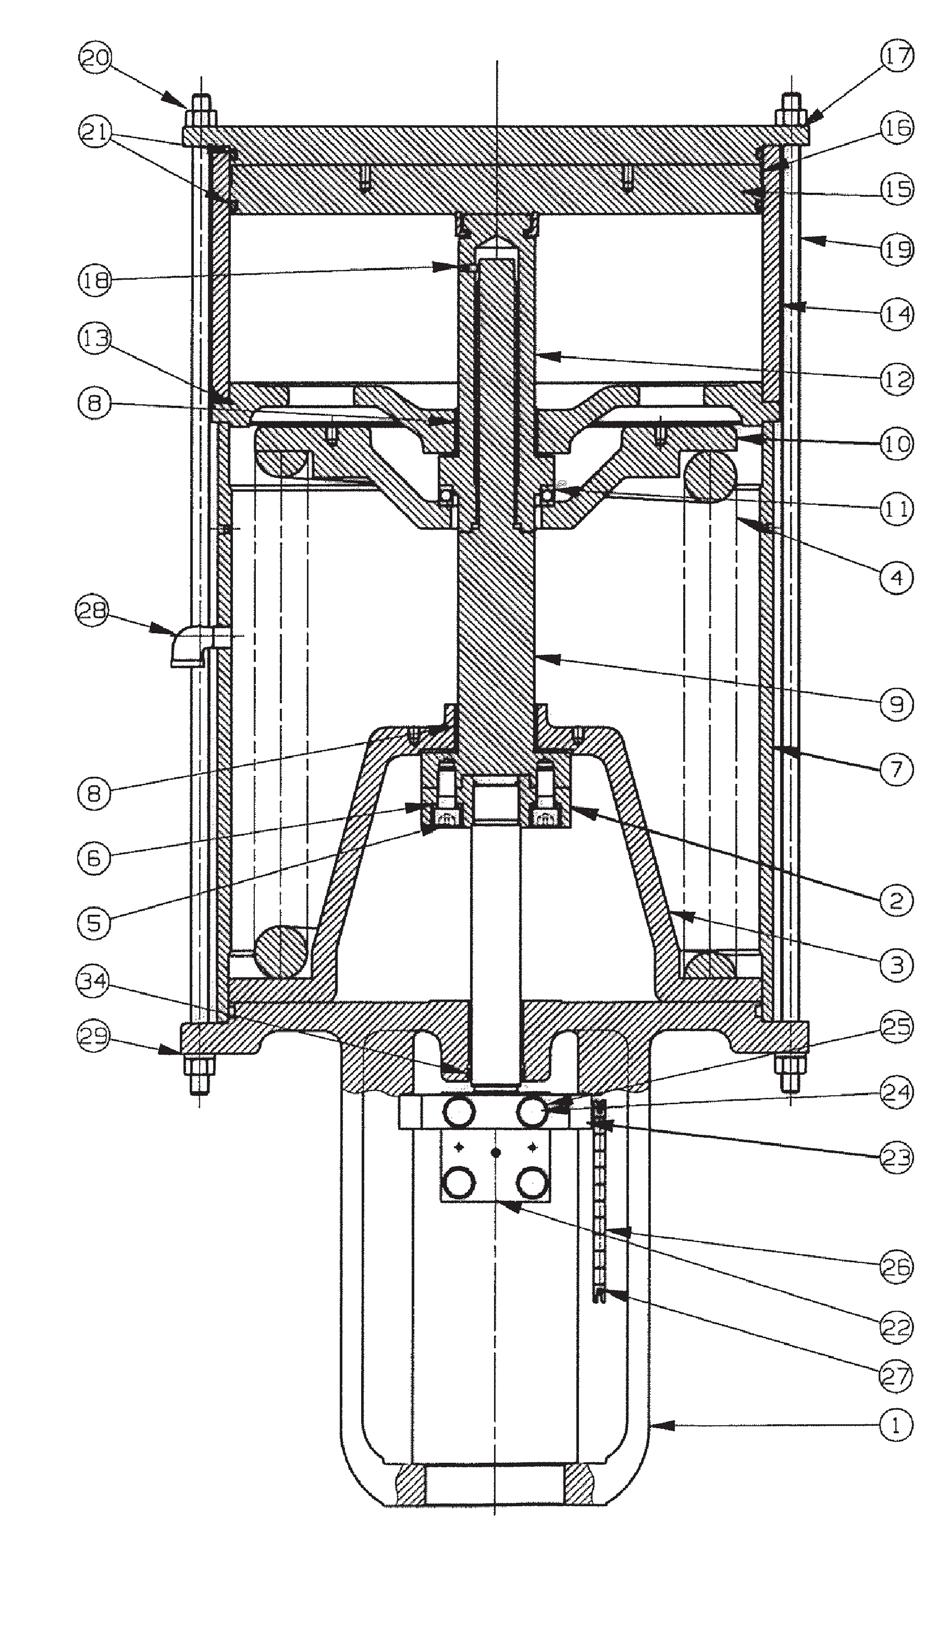 chamber Figure 14 Model 52 (Air to